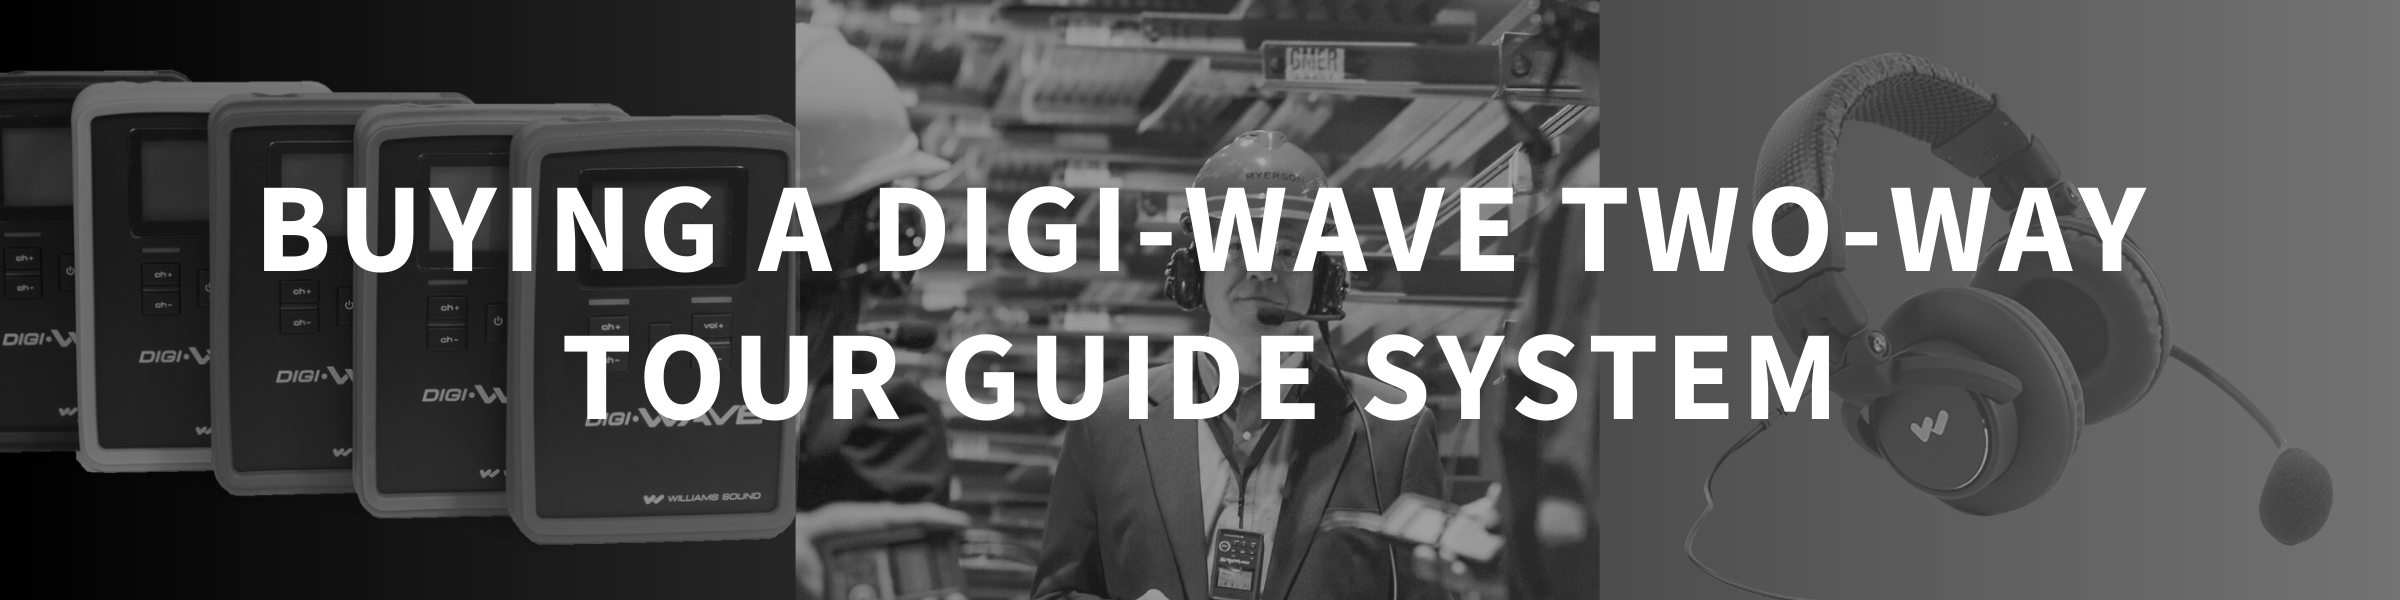 Buying a Digi-wave Two-way Tour Guide System